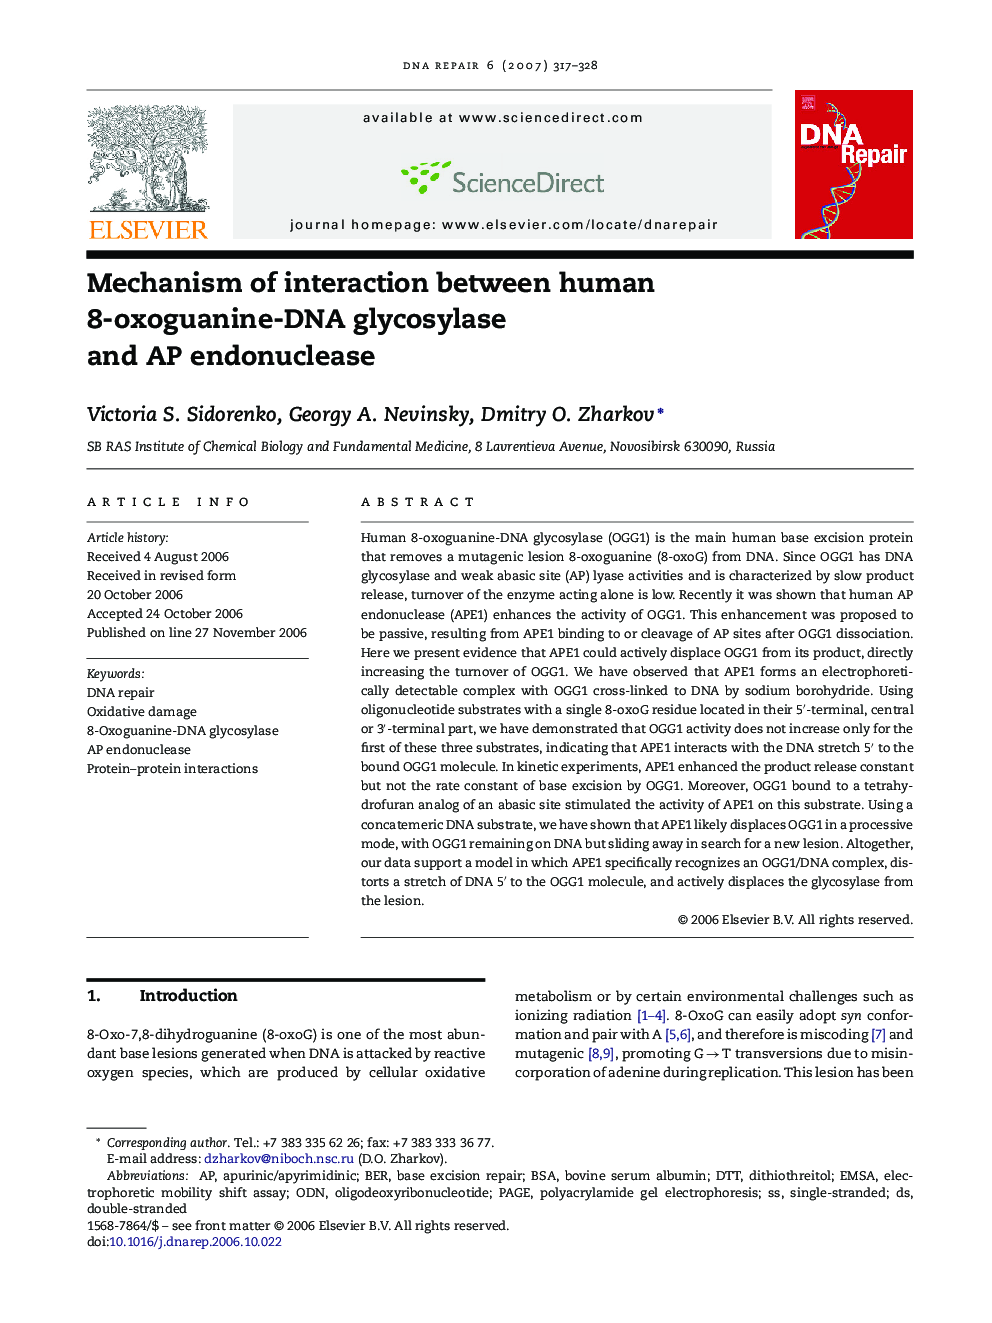 Mechanism of interaction between human 8-oxoguanine-DNA glycosylase and AP endonuclease